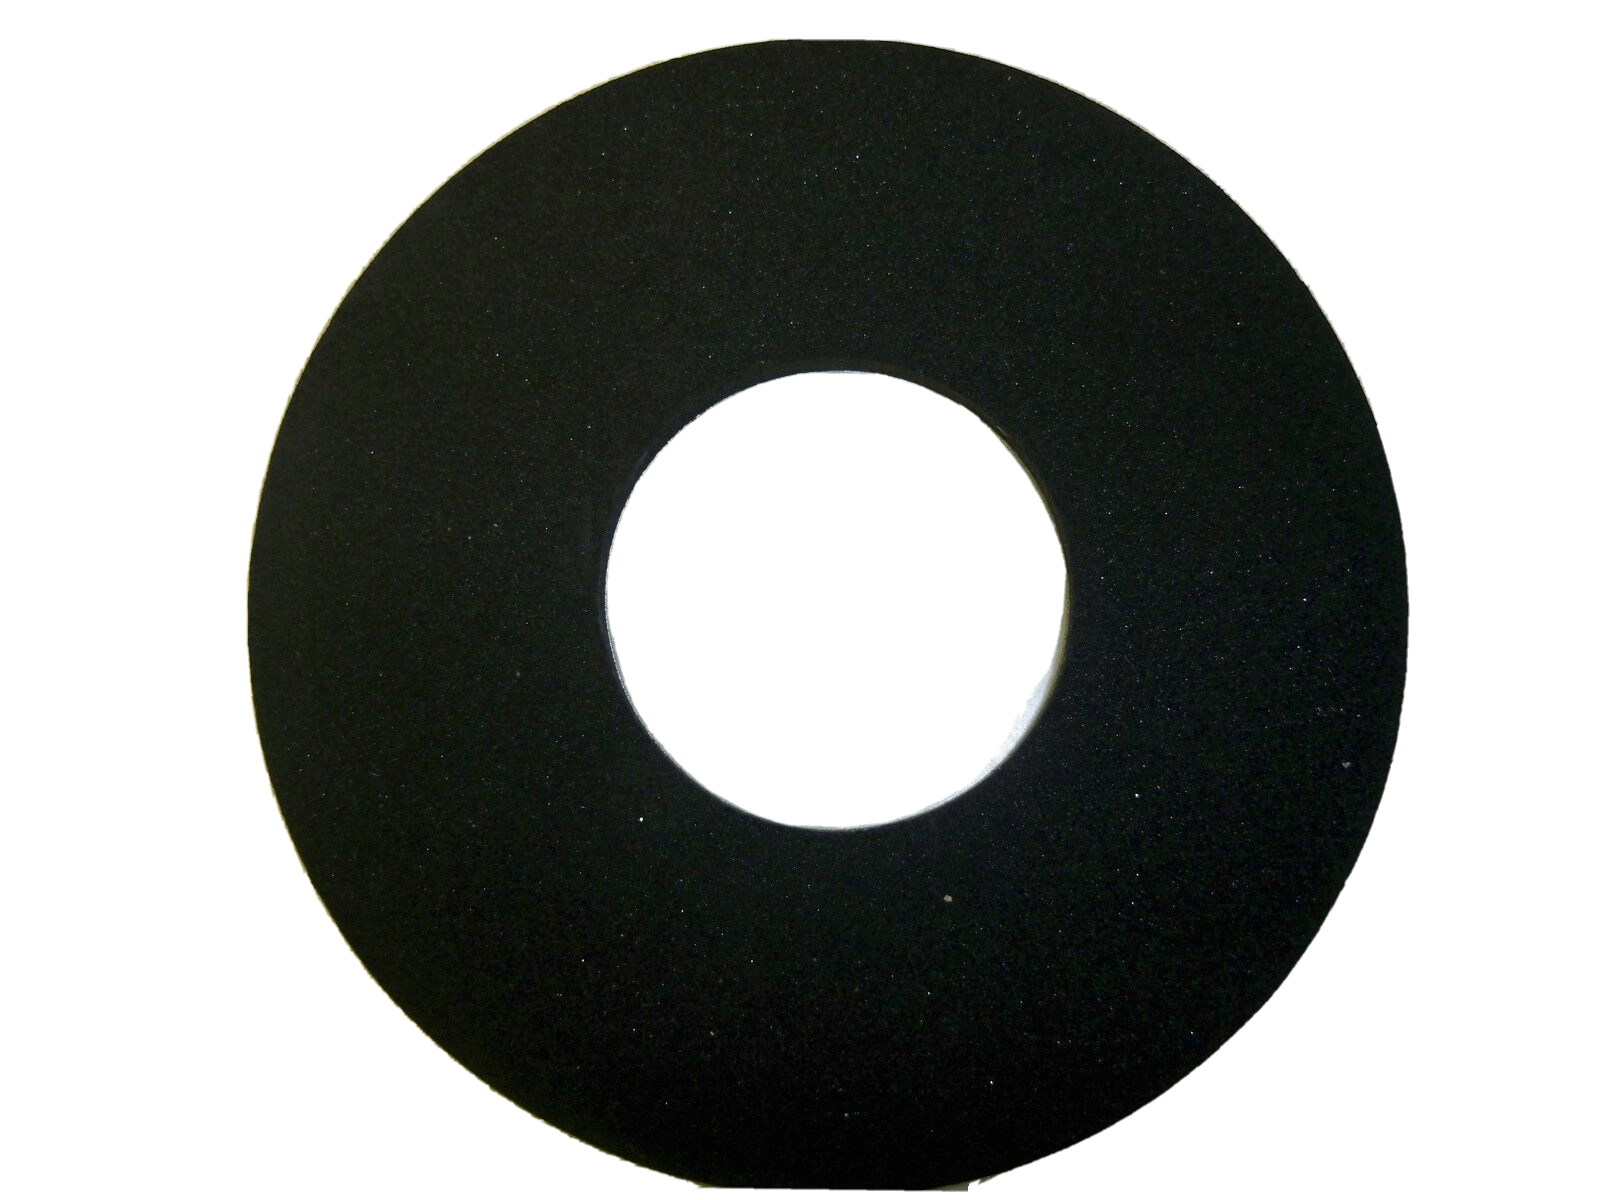 Vacuum cleaner adhesive seal gasket D=127, d=50mm, thickness 3mm Microwave ovens, vacuum cleaners, irons, hoods and other small parts of the technique